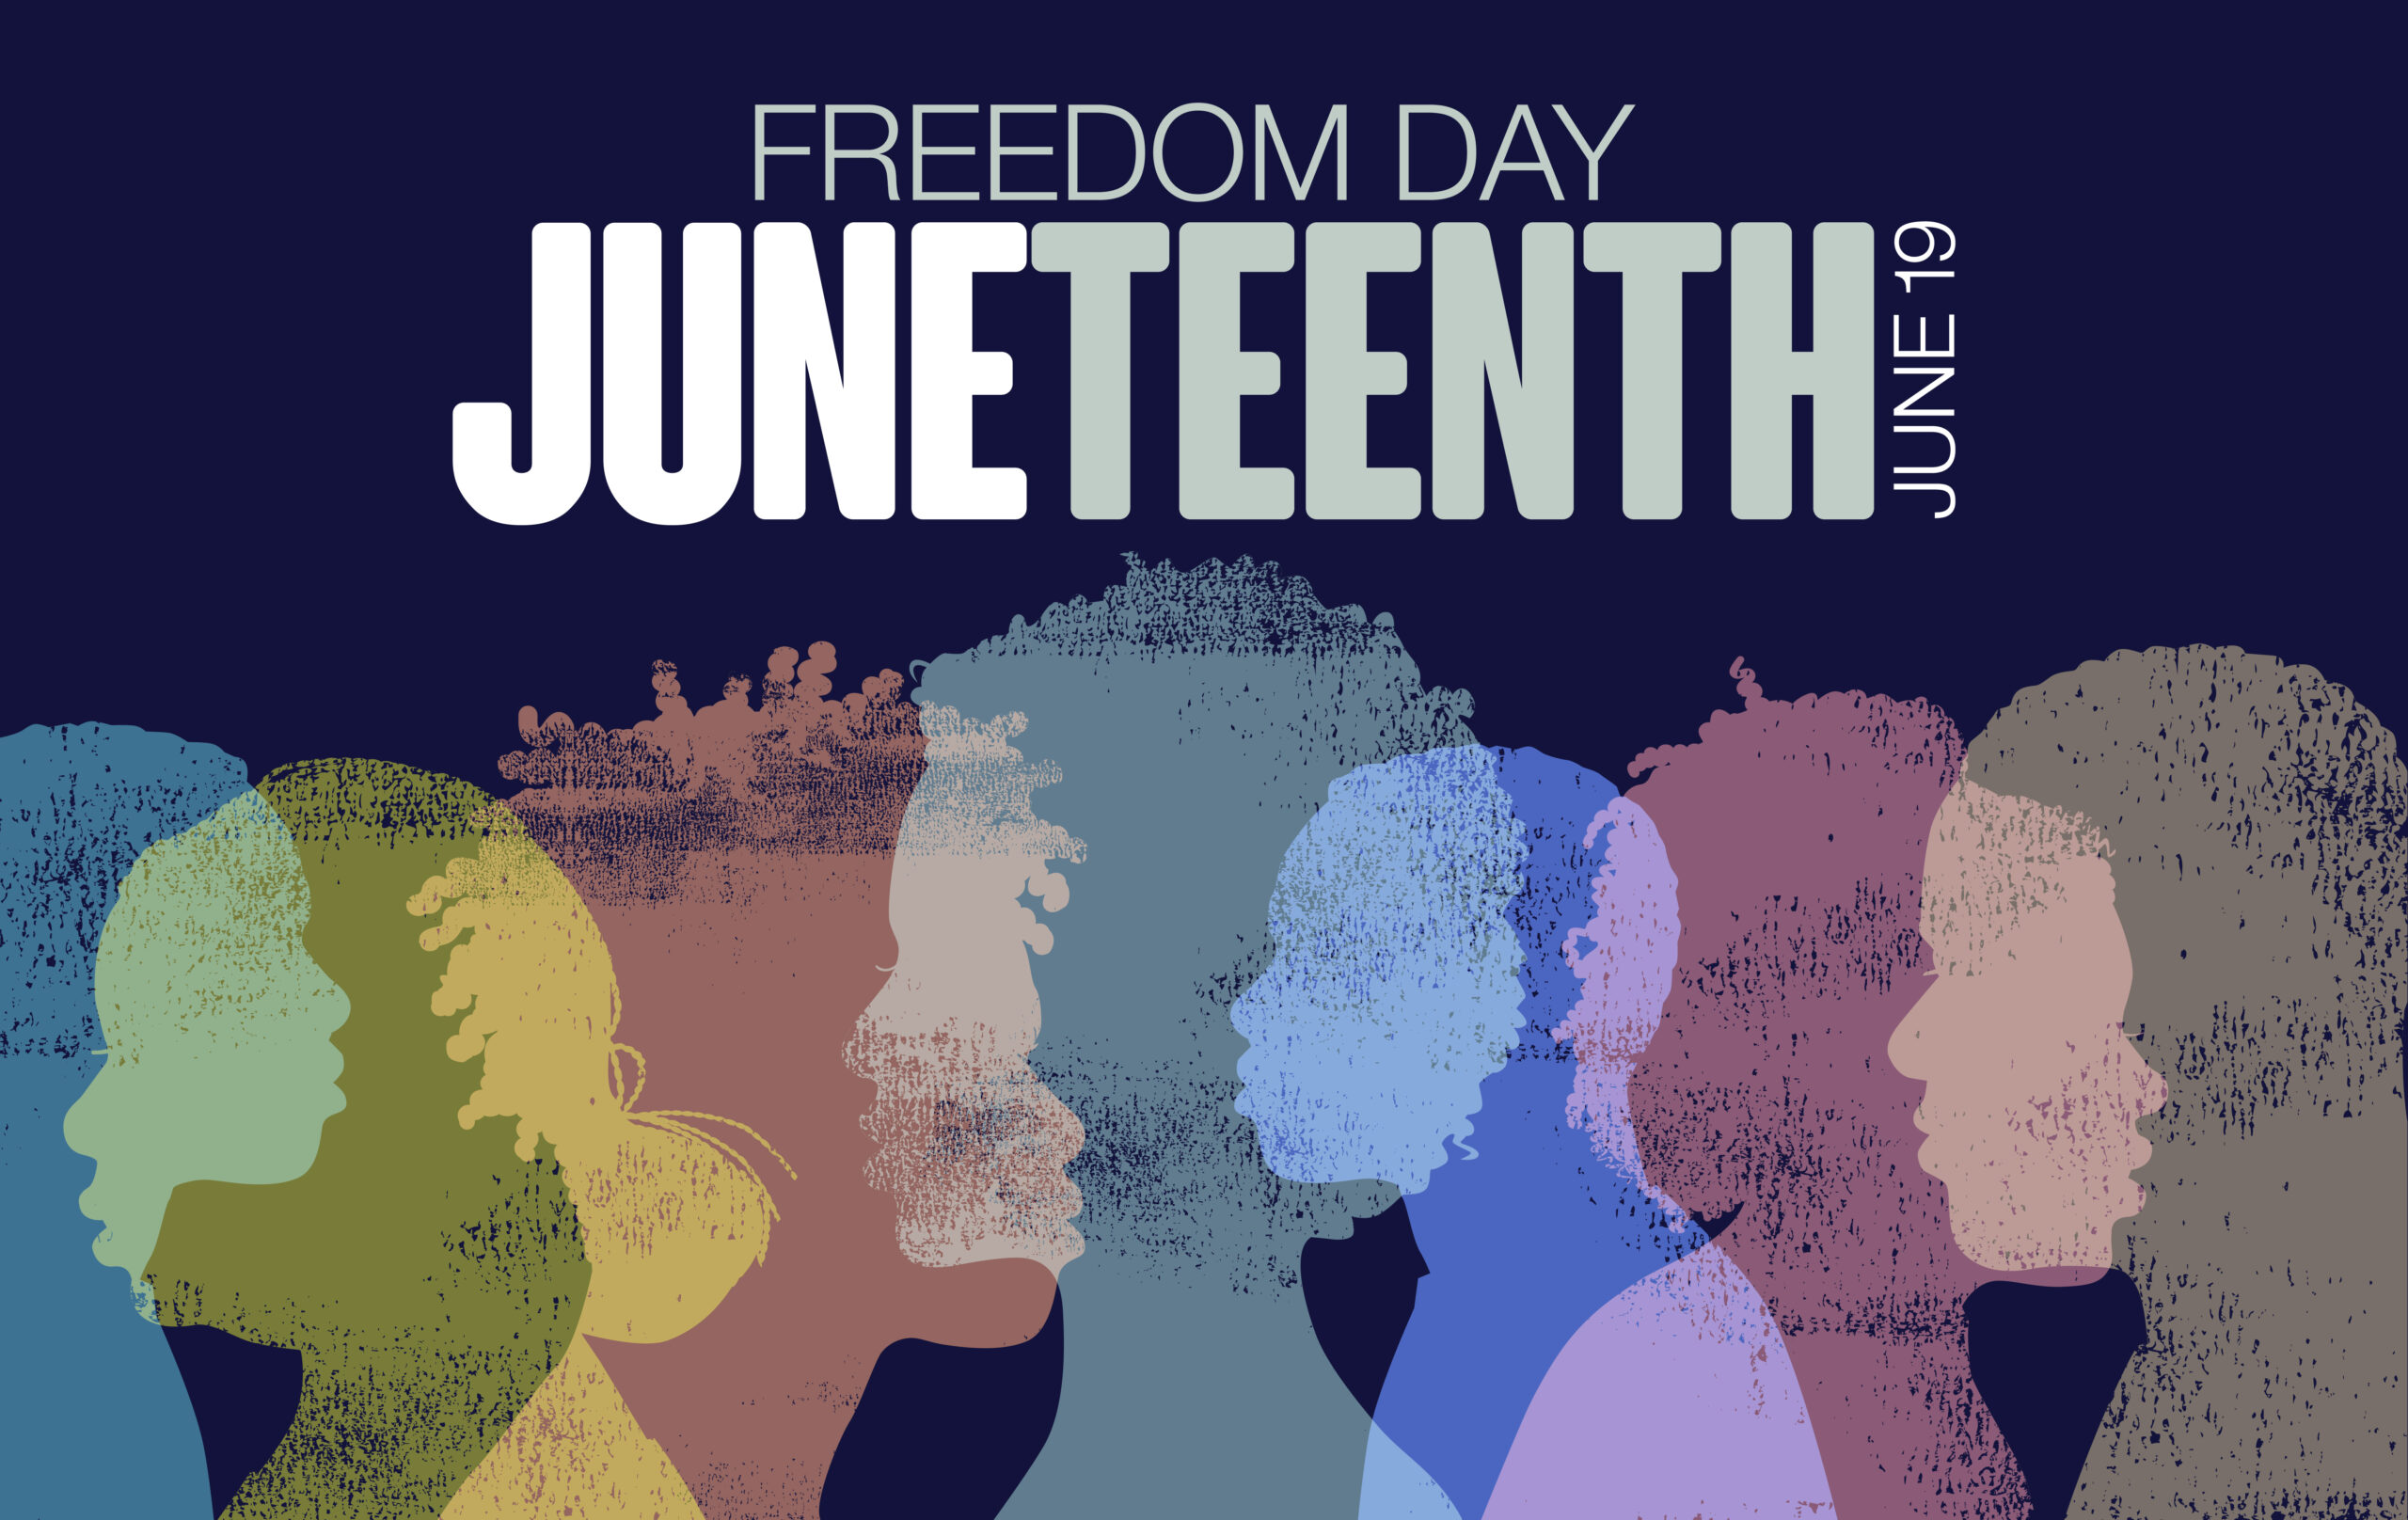 Freedom Day Juneteenth June 19 - Colorful outlines of Black Americans